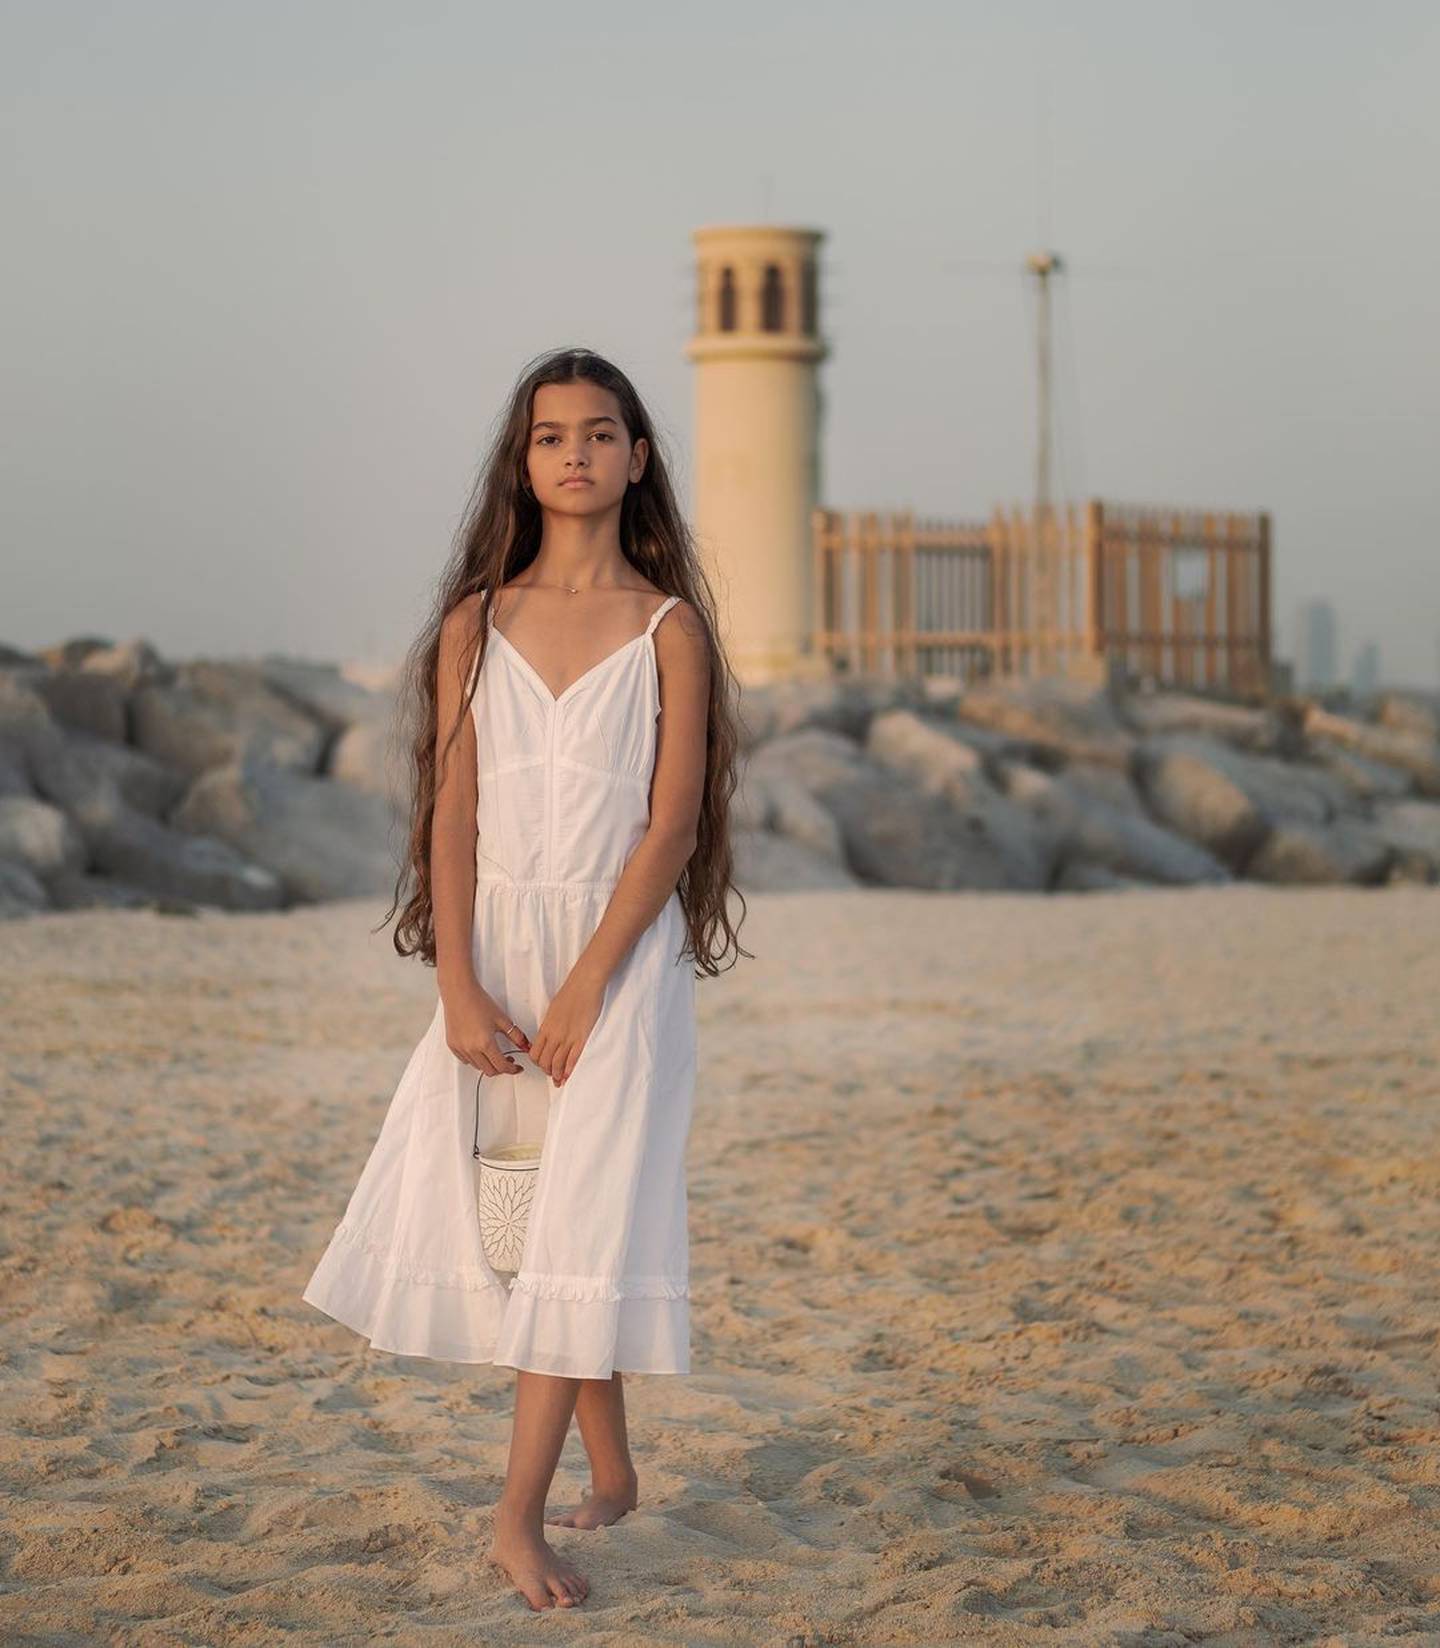 Expo 2020 Dubai opening ceremony star Mira Singh has been modelling since she was 6. Photo: Mira Singh